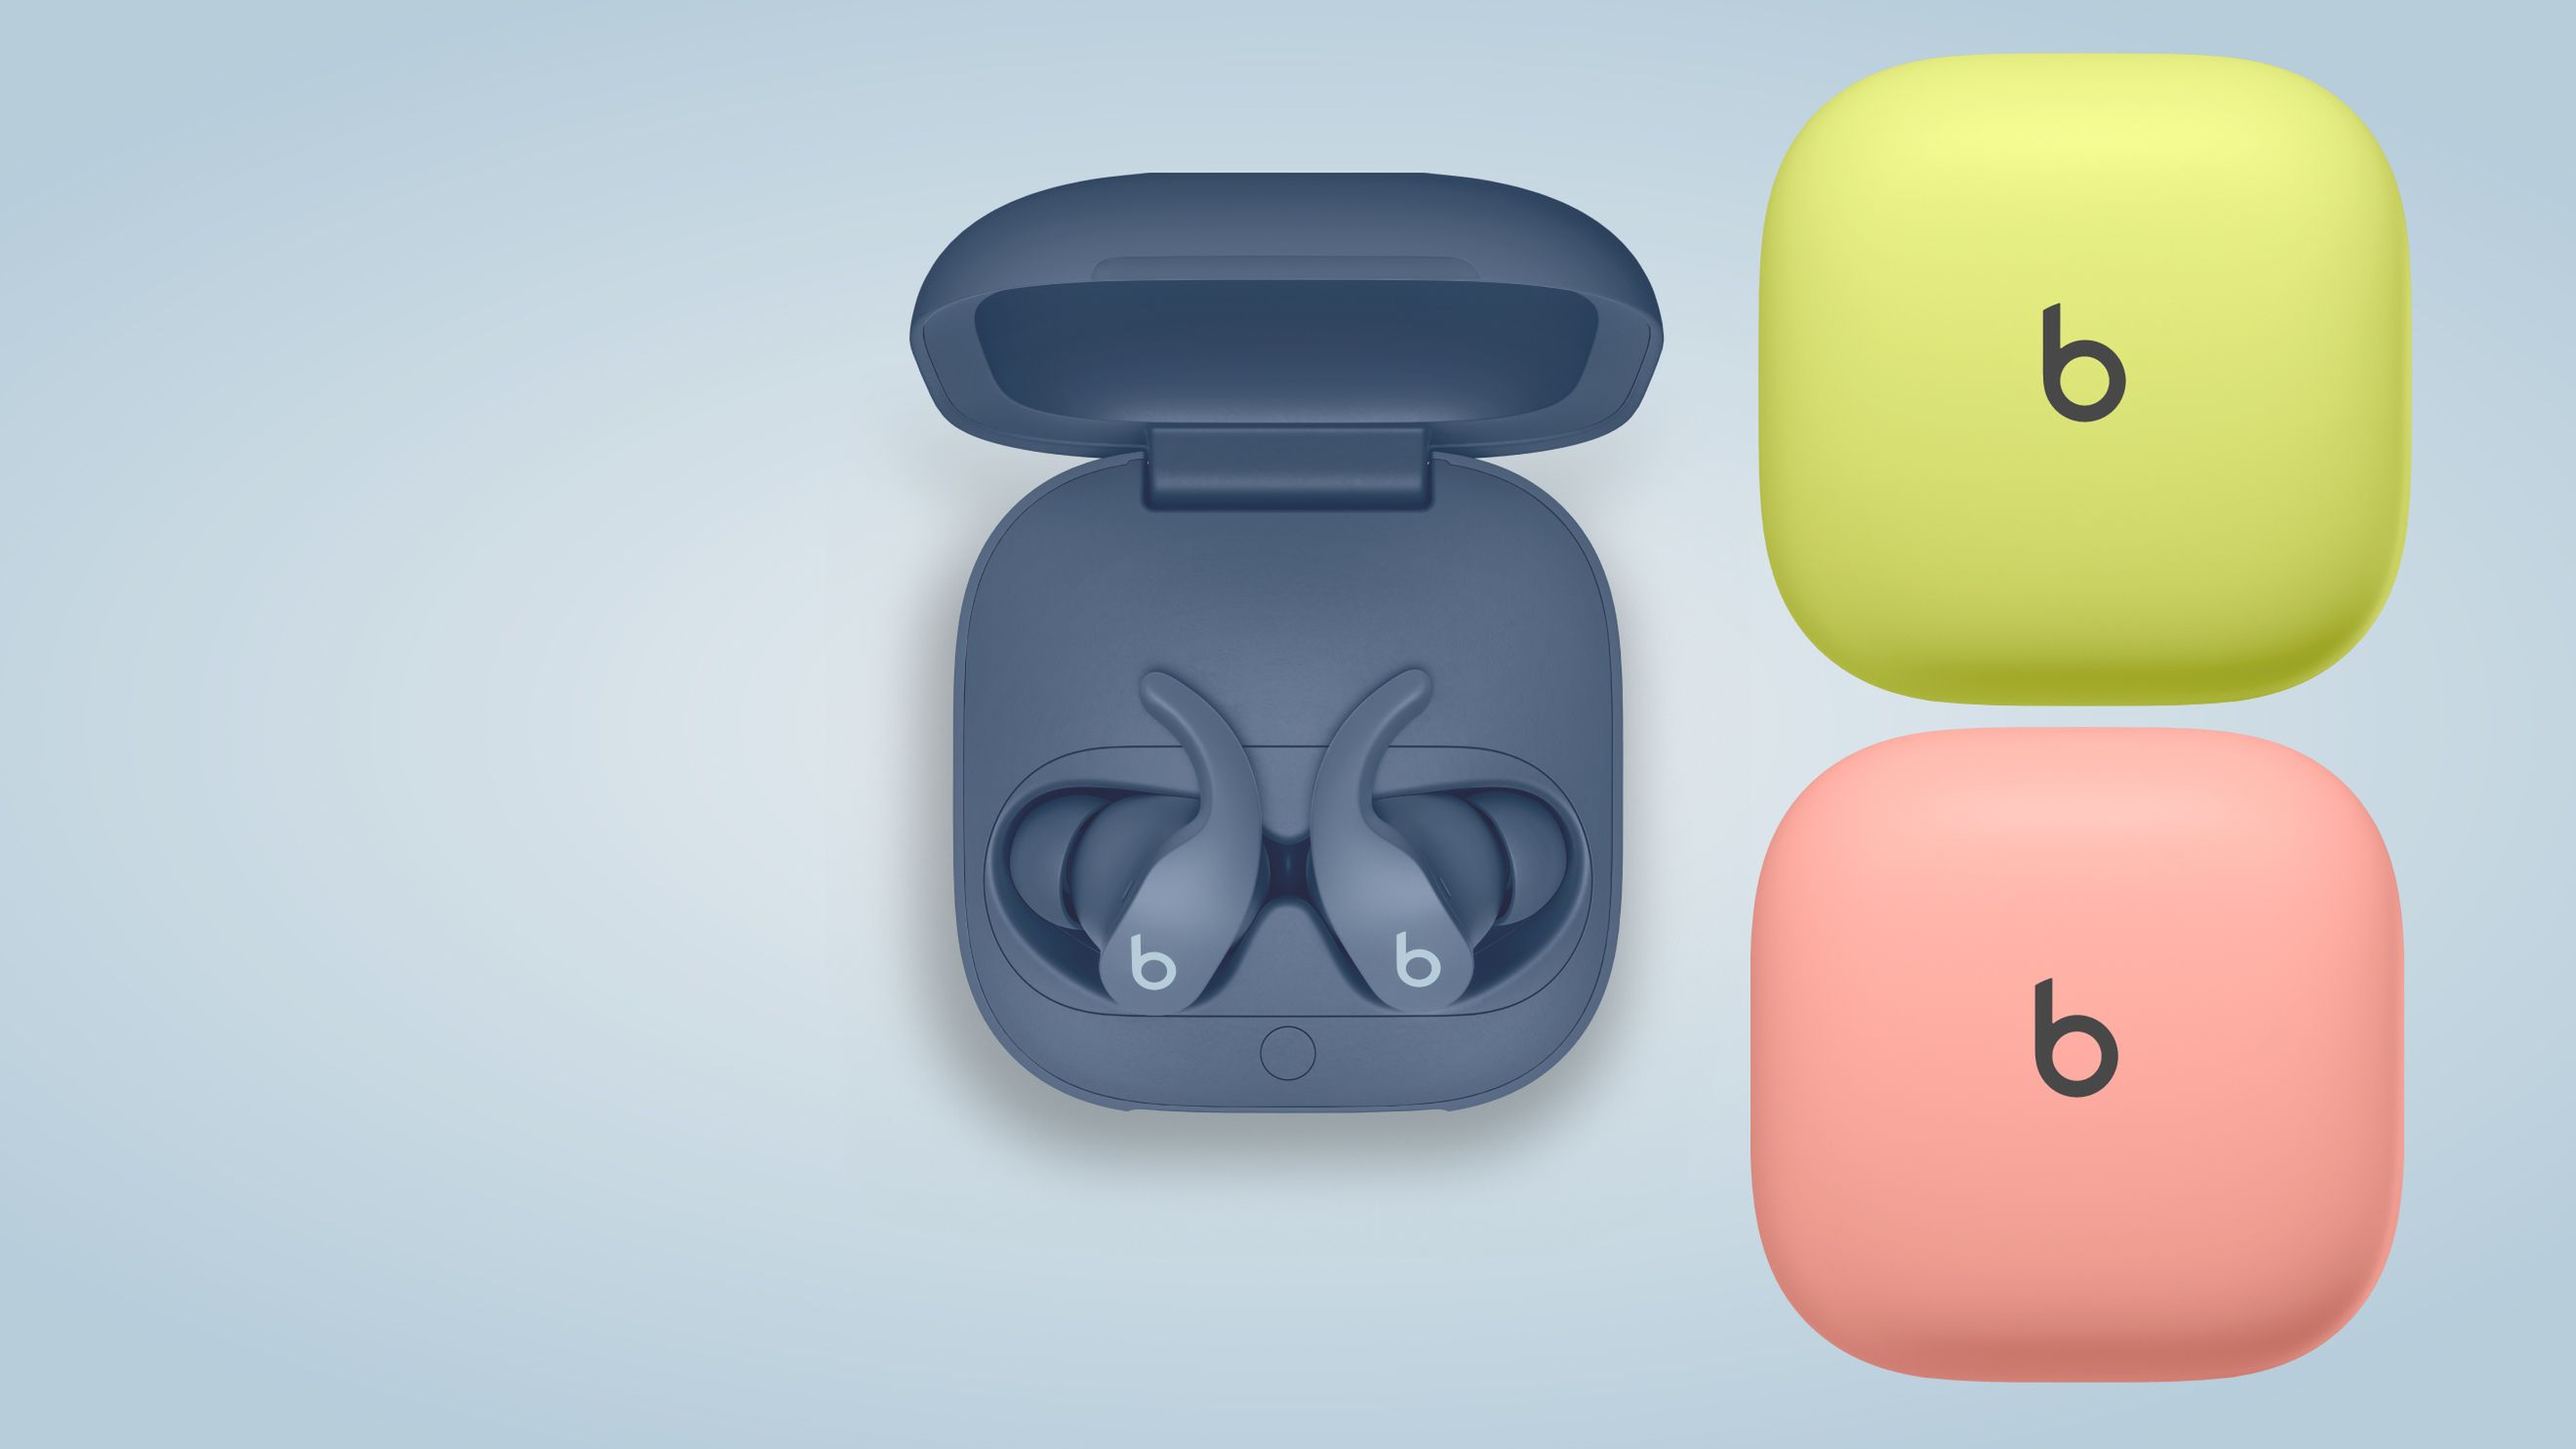 Beats Fit Pro earbuds debut in three electric new colors